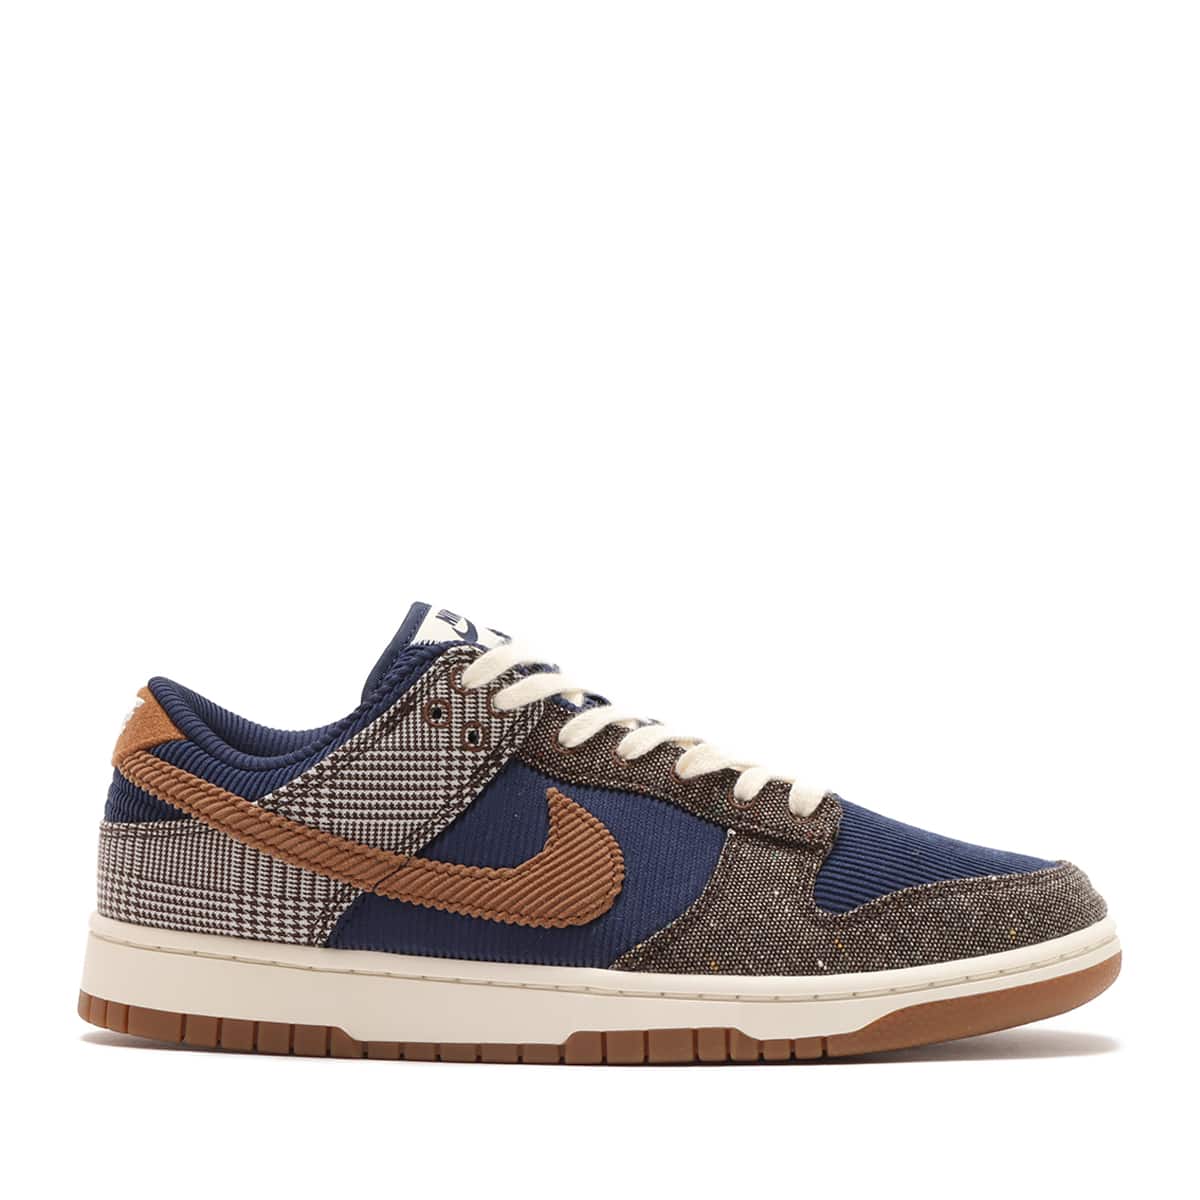 NIKE DUNK LOW PRM MIDNIGHT NAVY/ALE BROWN-PALE IVORY